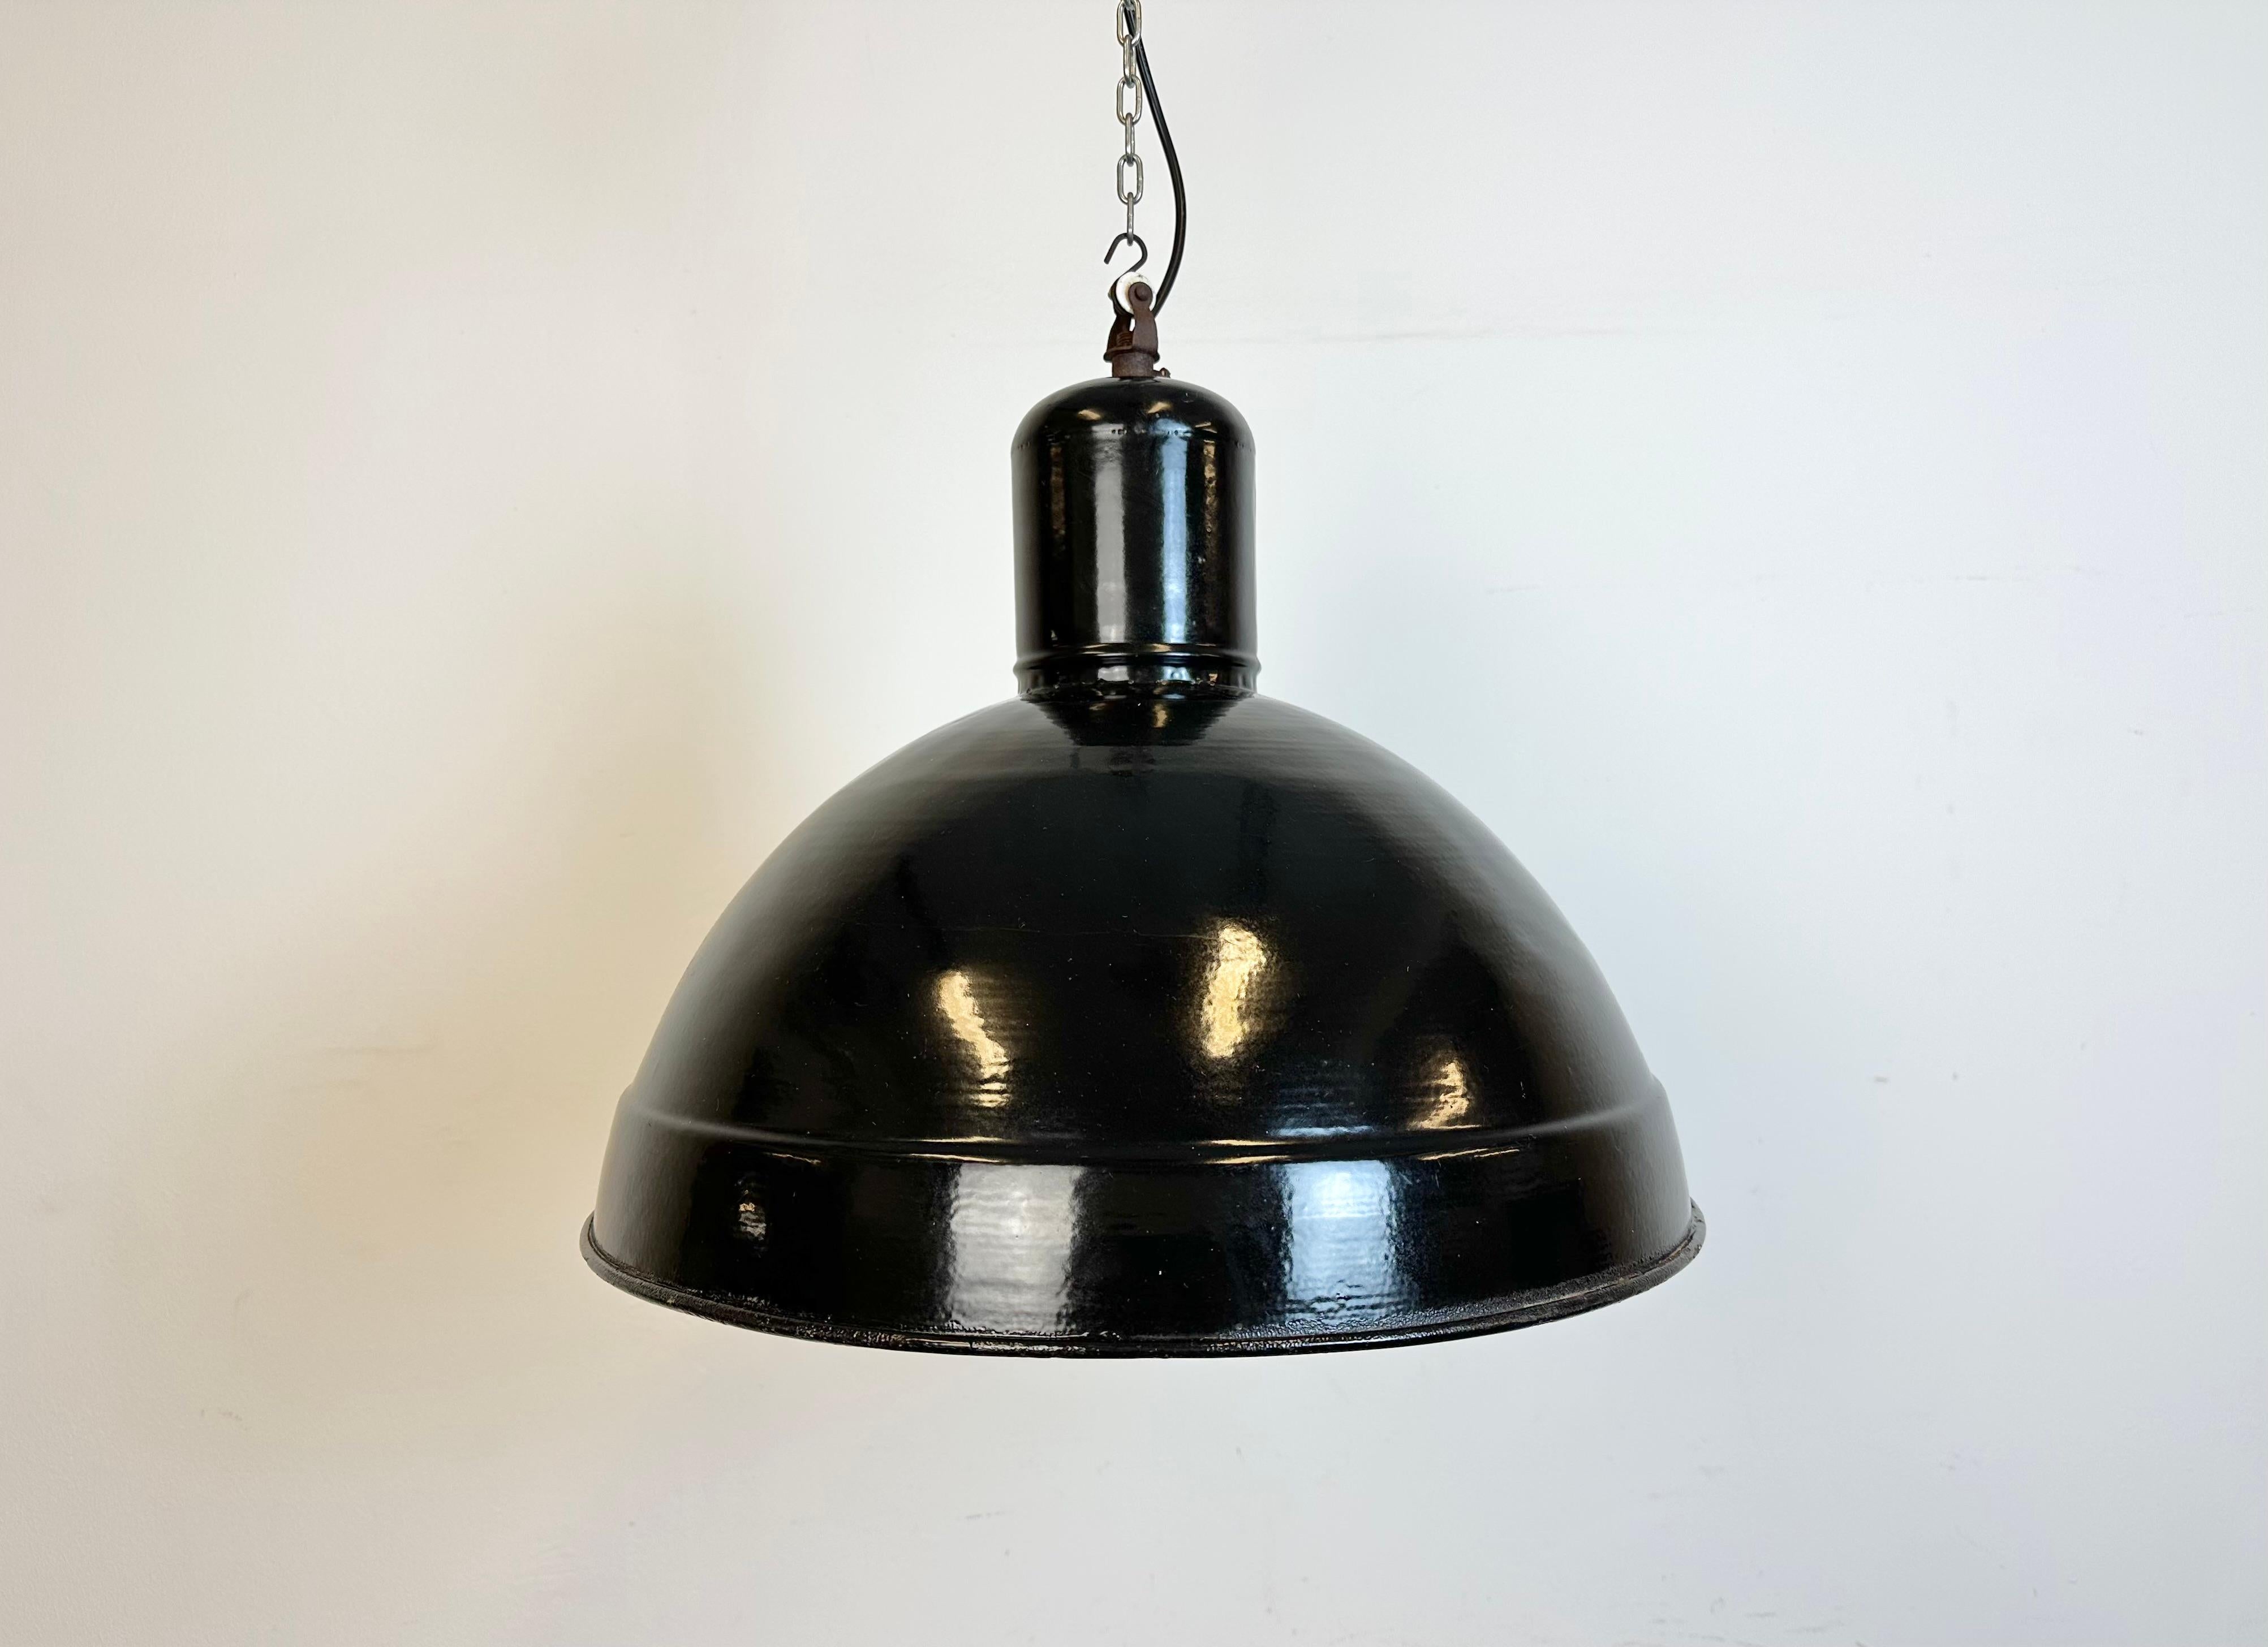 Industrial factory hanging lamp made in former Czechoslovakia during the 1950s. It features a black enamel shade with white enamel interior and an iron top. New  socket requires standard E 27/ E 26 light bulbs. New wire. The lamp weighs 2,4 kg. The